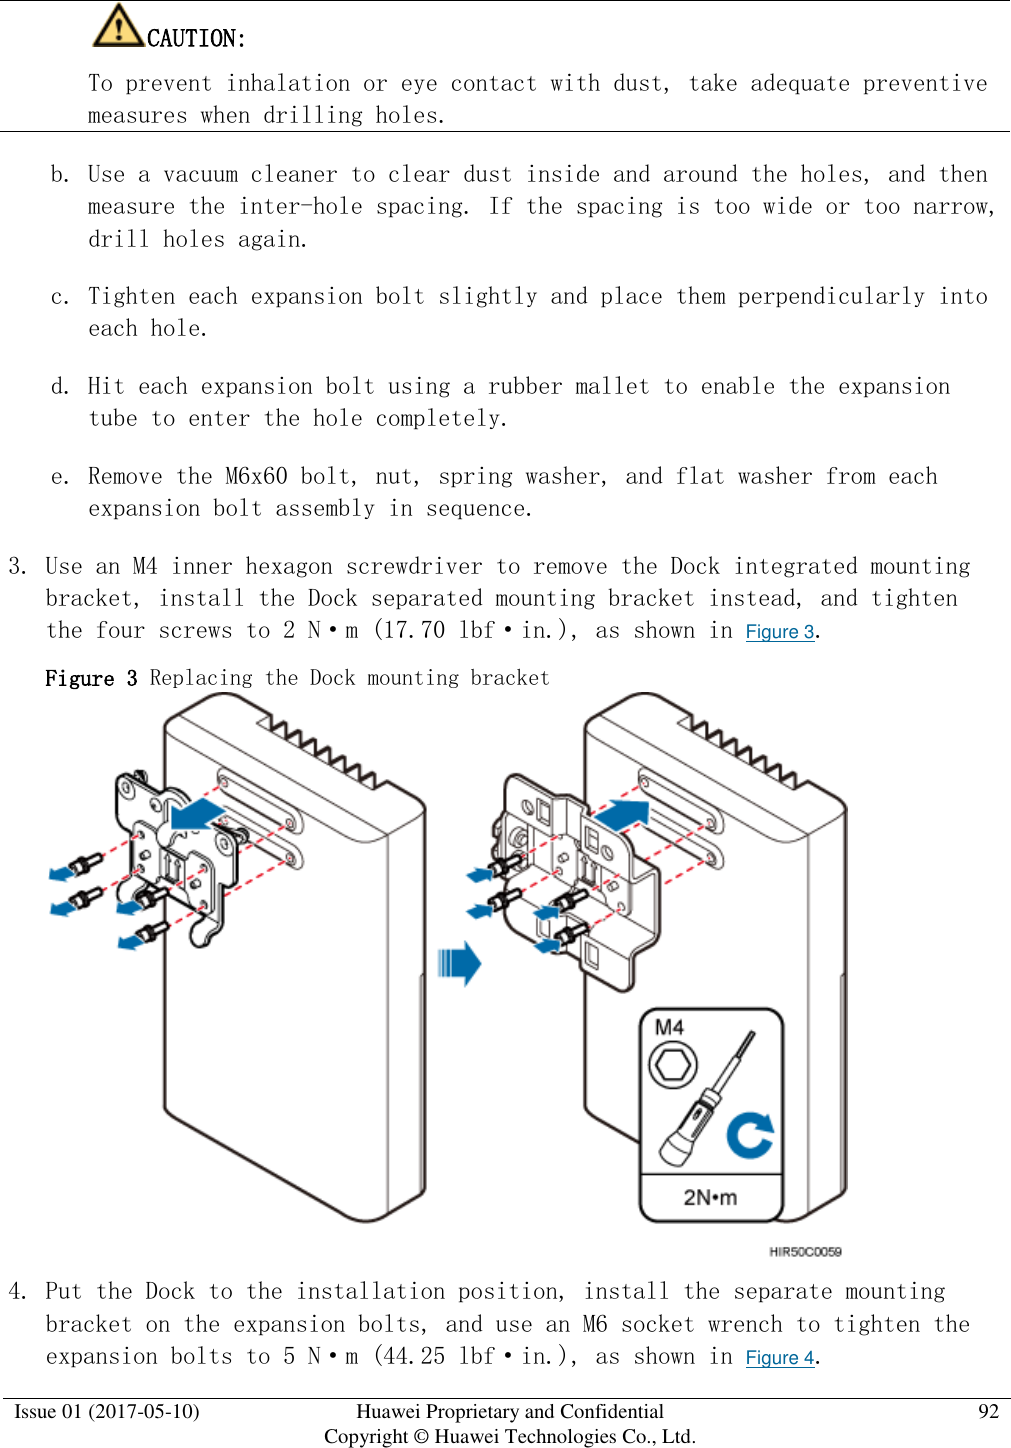  Issue 01 (2017-05-10) Huawei Proprietary and Confidential      Copyright © Huawei Technologies Co., Ltd. 92  CAUTION:  To prevent inhalation or eye contact with dust, take adequate preventive measures when drilling holes.  b. Use a vacuum cleaner to clear dust inside and around the holes, and then measure the inter-hole spacing. If the spacing is too wide or too narrow, drill holes again. c. Tighten each expansion bolt slightly and place them perpendicularly into each hole. d. Hit each expansion bolt using a rubber mallet to enable the expansion tube to enter the hole completely. e. Remove the M6x60 bolt, nut, spring washer, and flat washer from each expansion bolt assembly in sequence. 3. Use an M4 inner hexagon screwdriver to remove the Dock integrated mounting bracket, install the Dock separated mounting bracket instead, and tighten the four screws to 2 N·m (17.70 lbf·in.), as shown in Figure 3.  Figure 3 Replacing the Dock mounting bracket   4. Put the Dock to the installation position, install the separate mounting bracket on the expansion bolts, and use an M6 socket wrench to tighten the expansion bolts to 5 N·m (44.25 lbf·in.), as shown in Figure 4.  